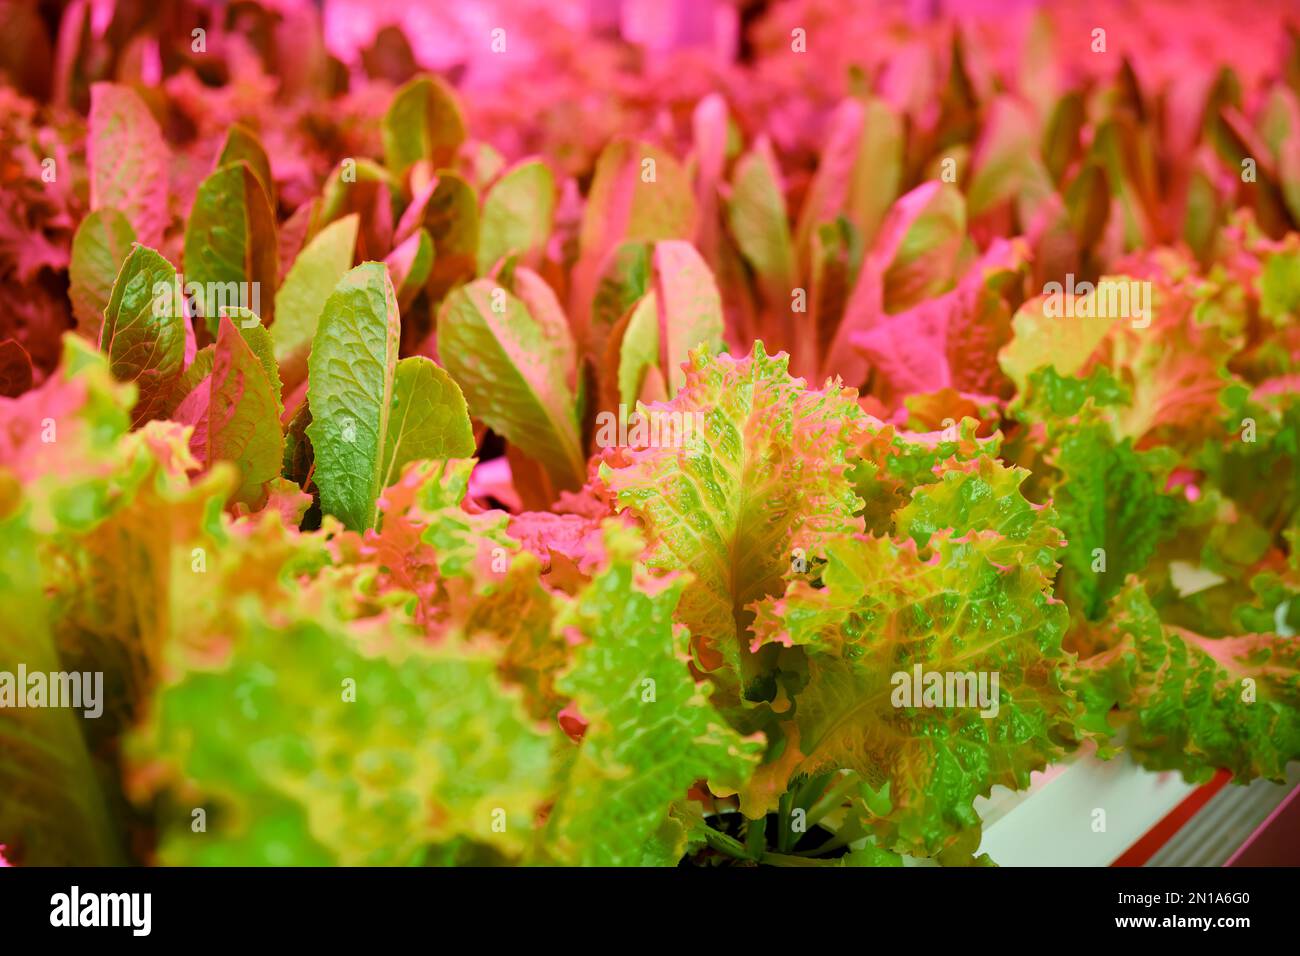 micro greenery cultivation close-up industrial manual labor green color juicy healthy vitamins farmer vegetarian restaurant cafe Stock Photo